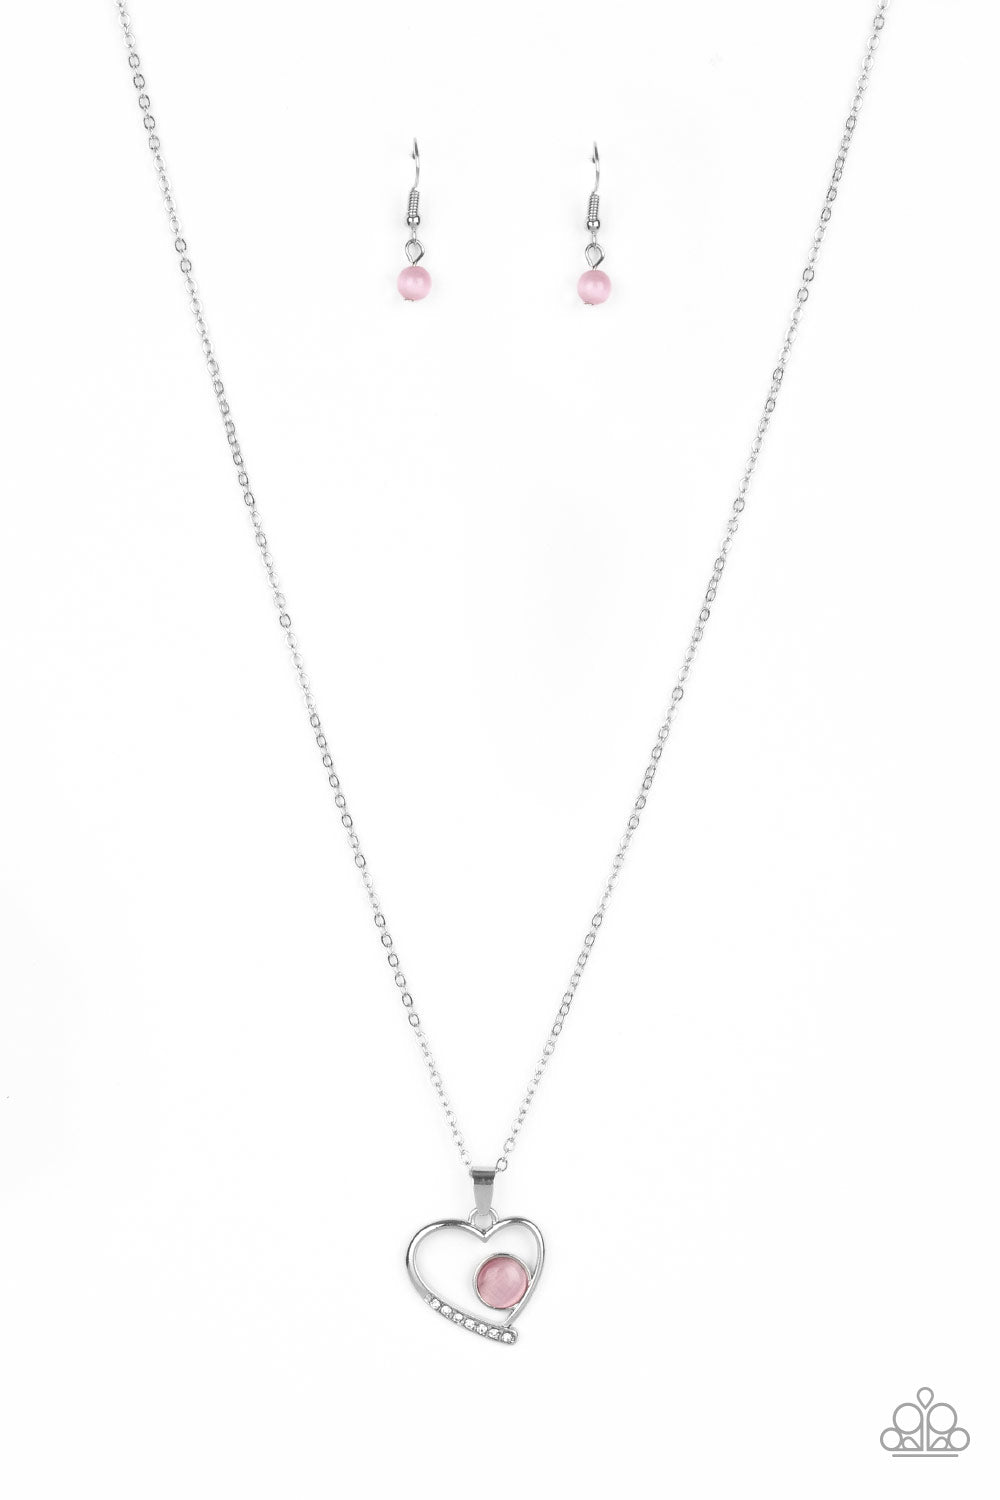 Heart Full of Love - Pink Necklace - Paparazzi Accessories